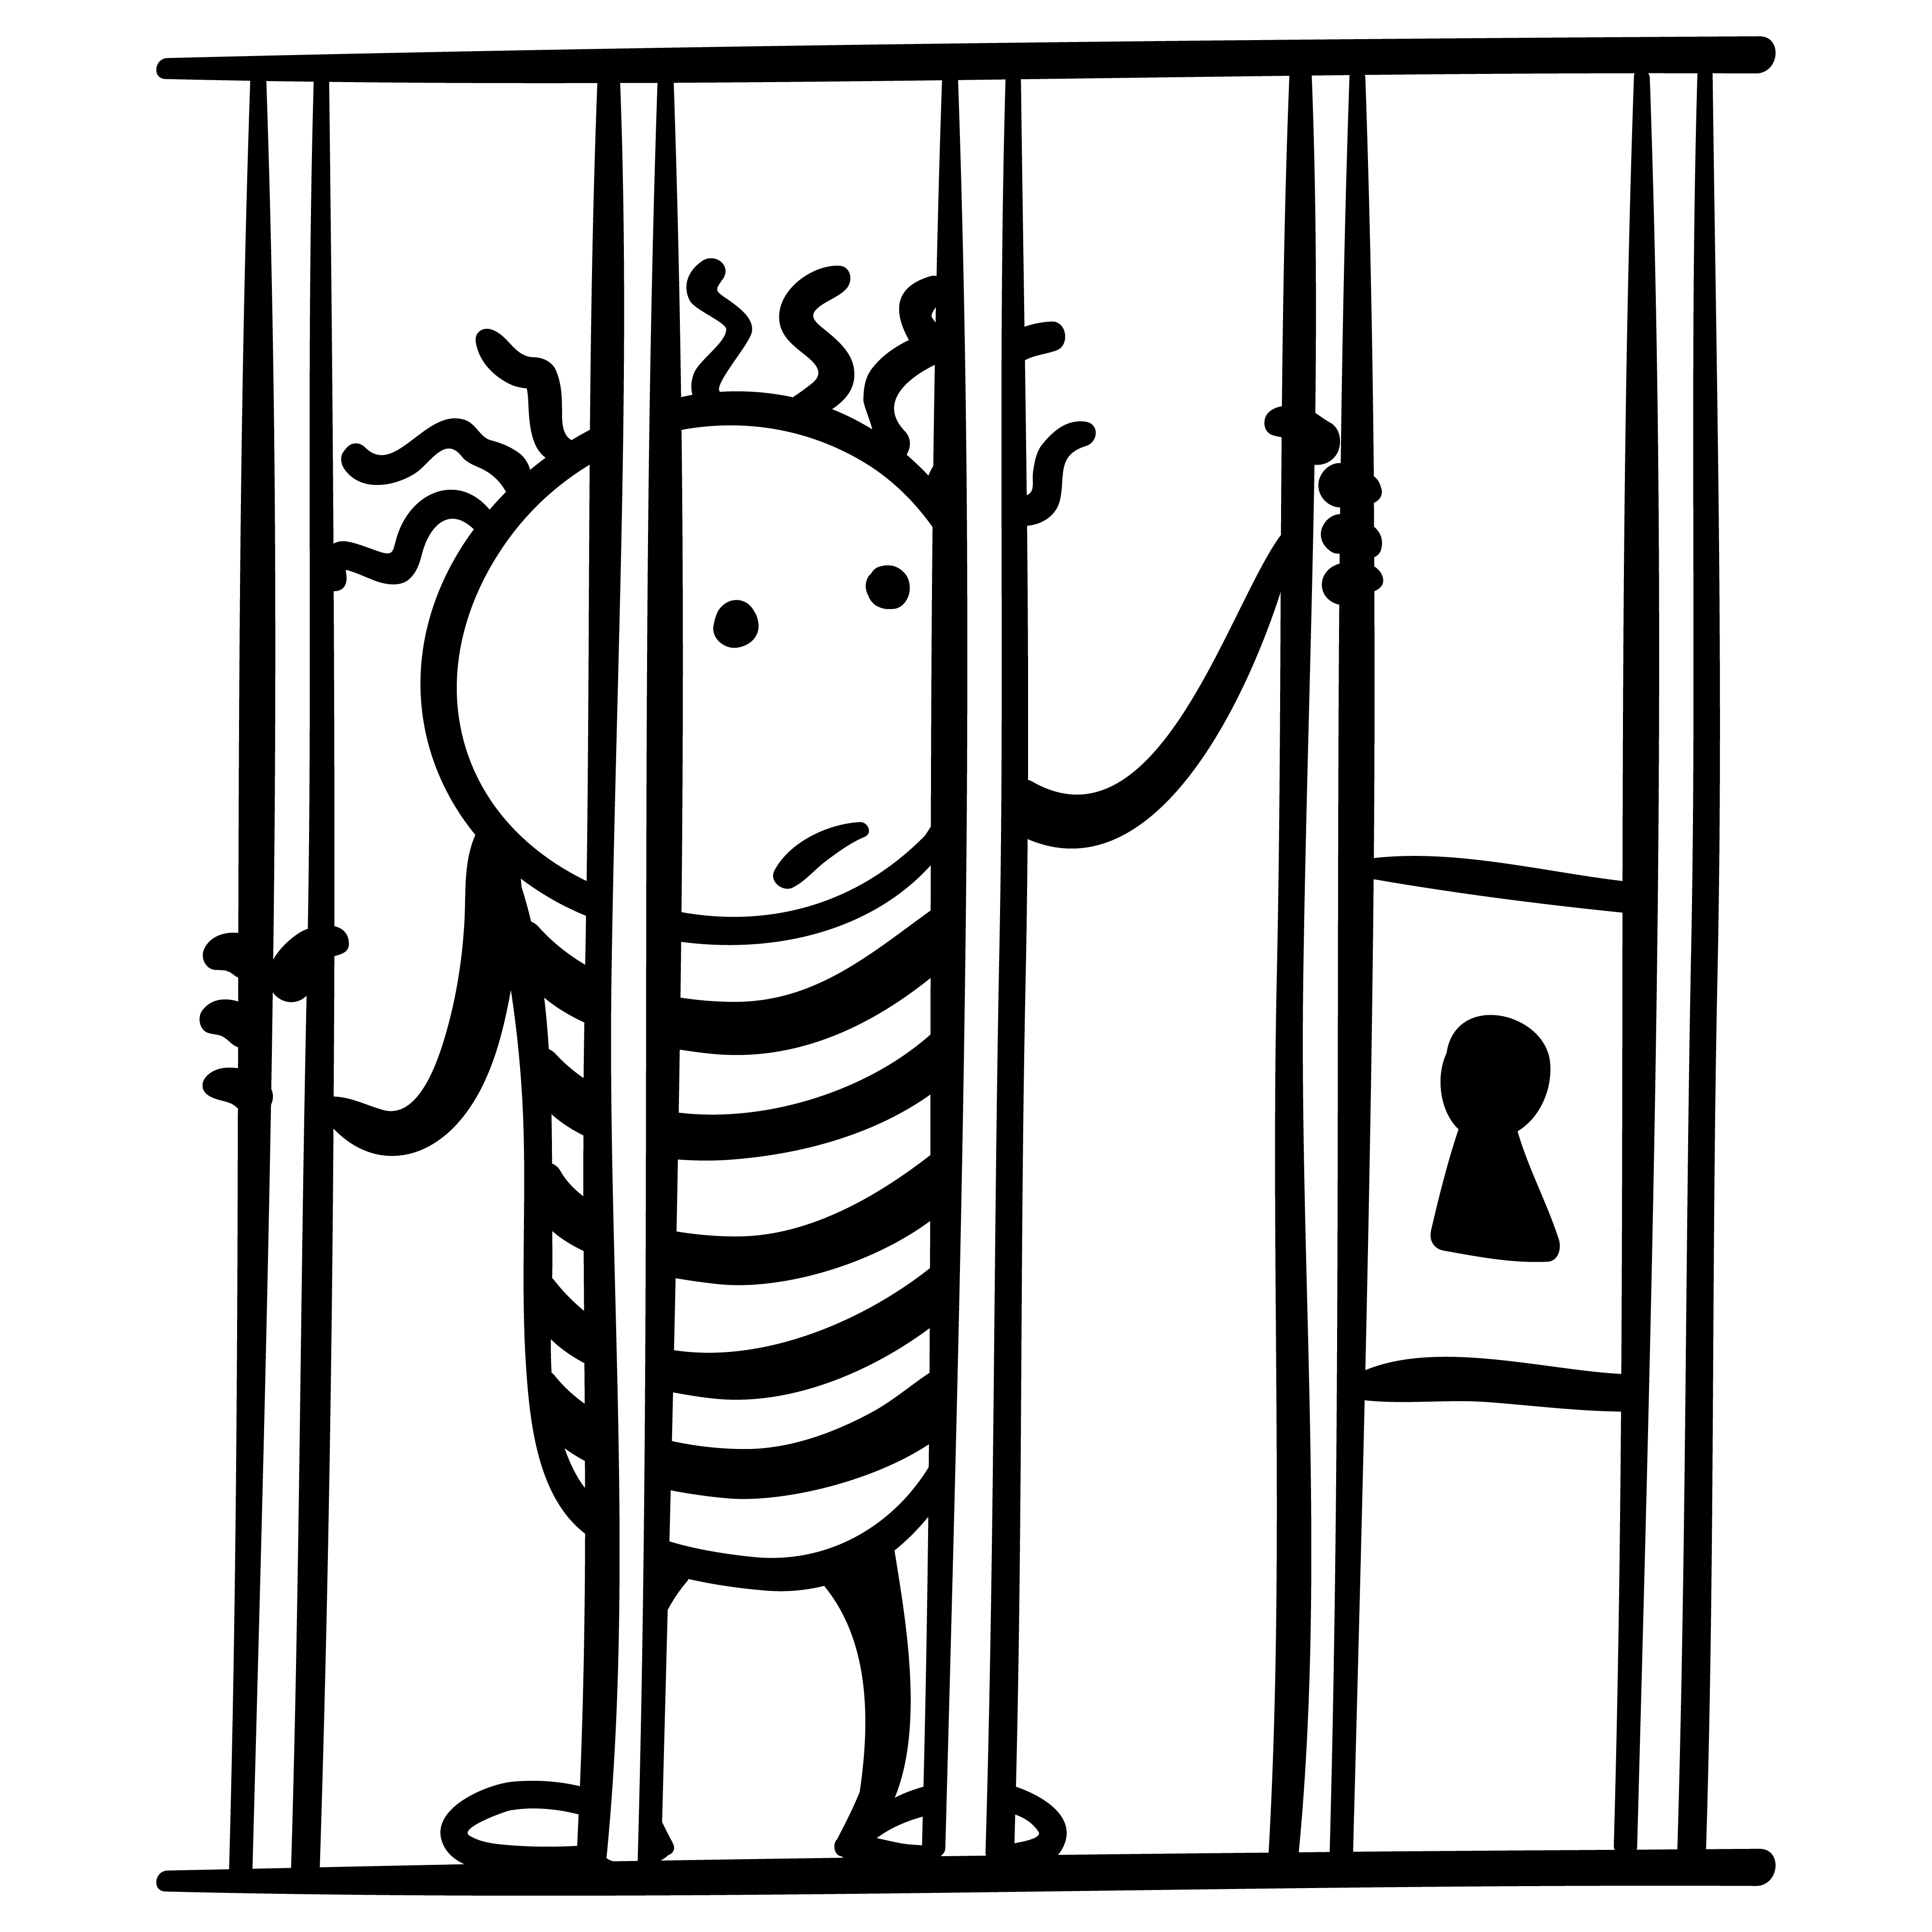 6 jail. cartoon. Free cliparts that you can download to you computer and use in your designs.